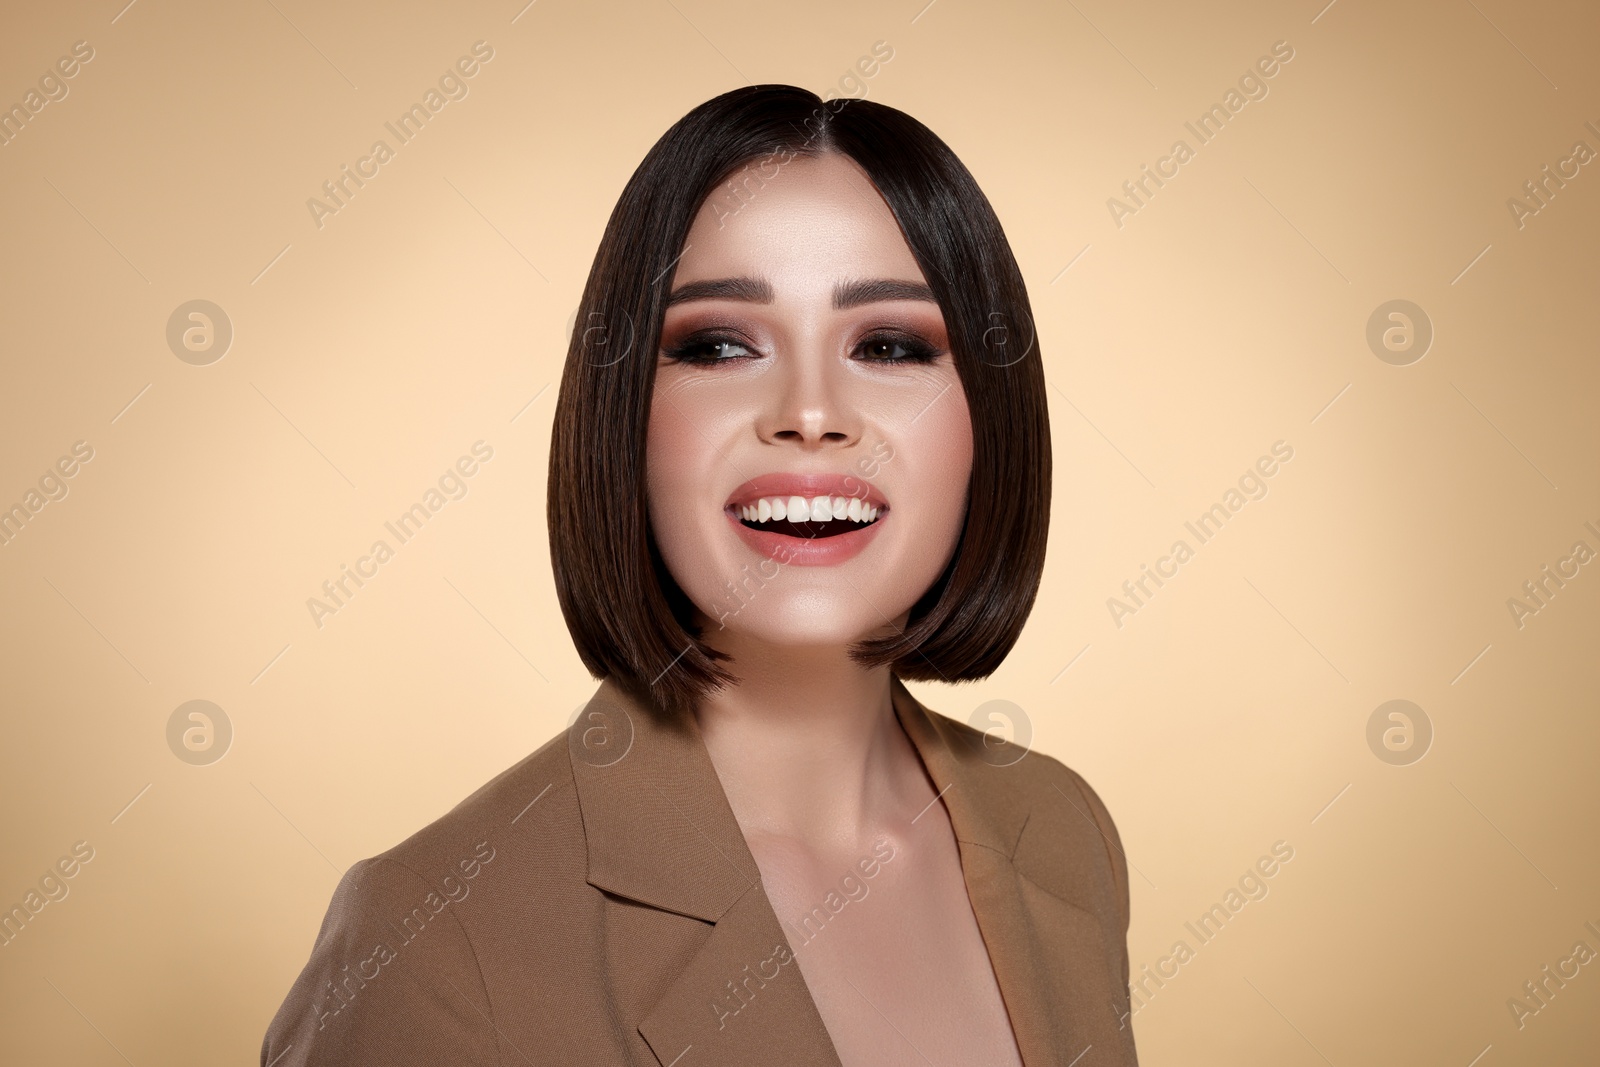 Image of Portrait of stylish pretty young woman smiling with brown hair on beige background